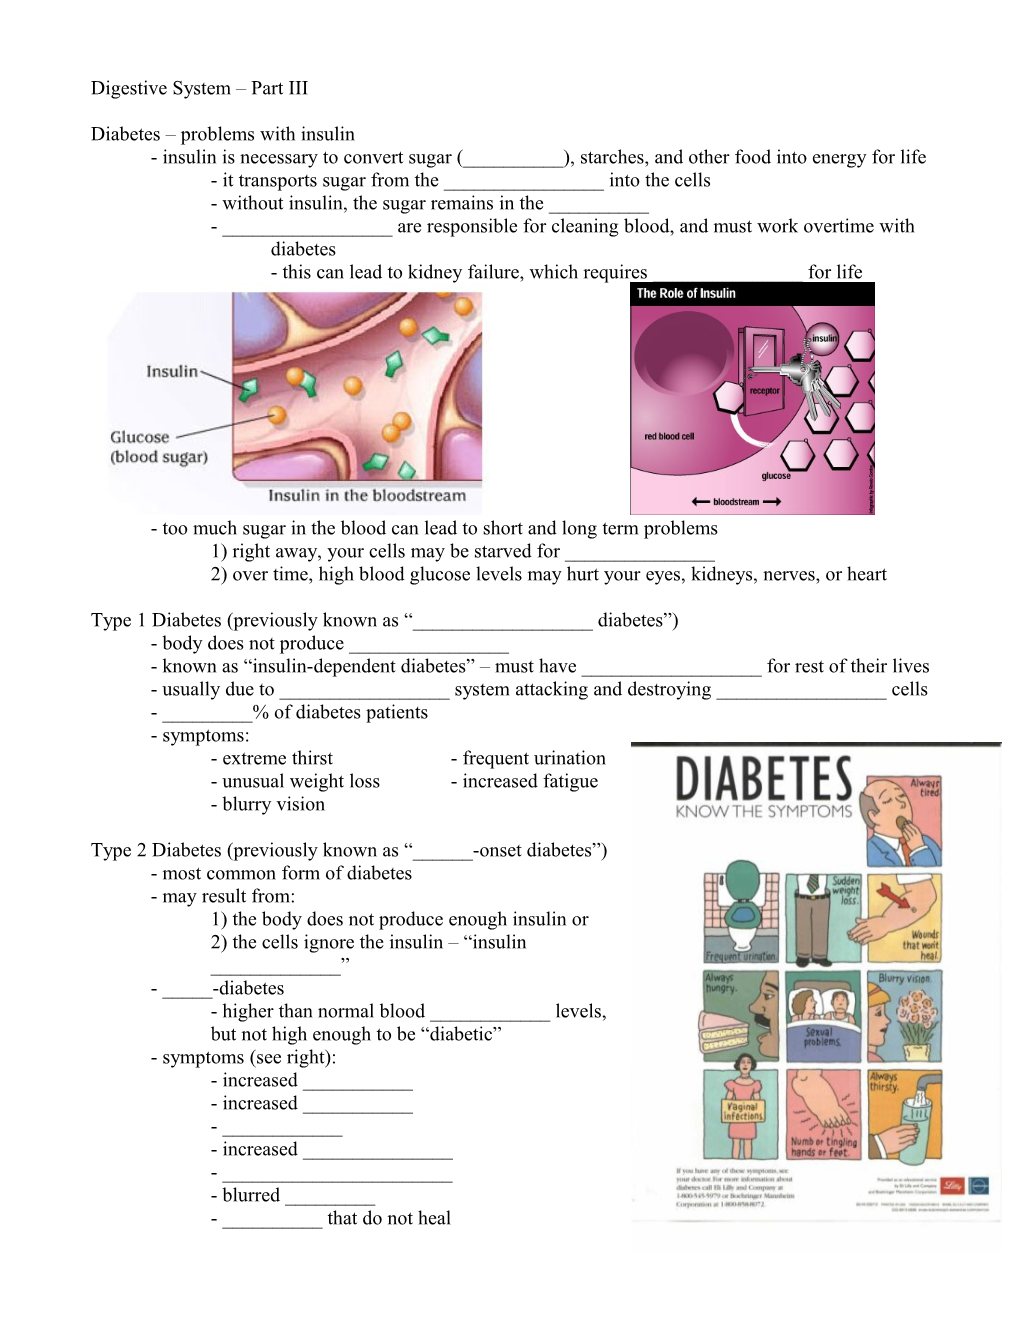 Digestive System Part III (Answers)